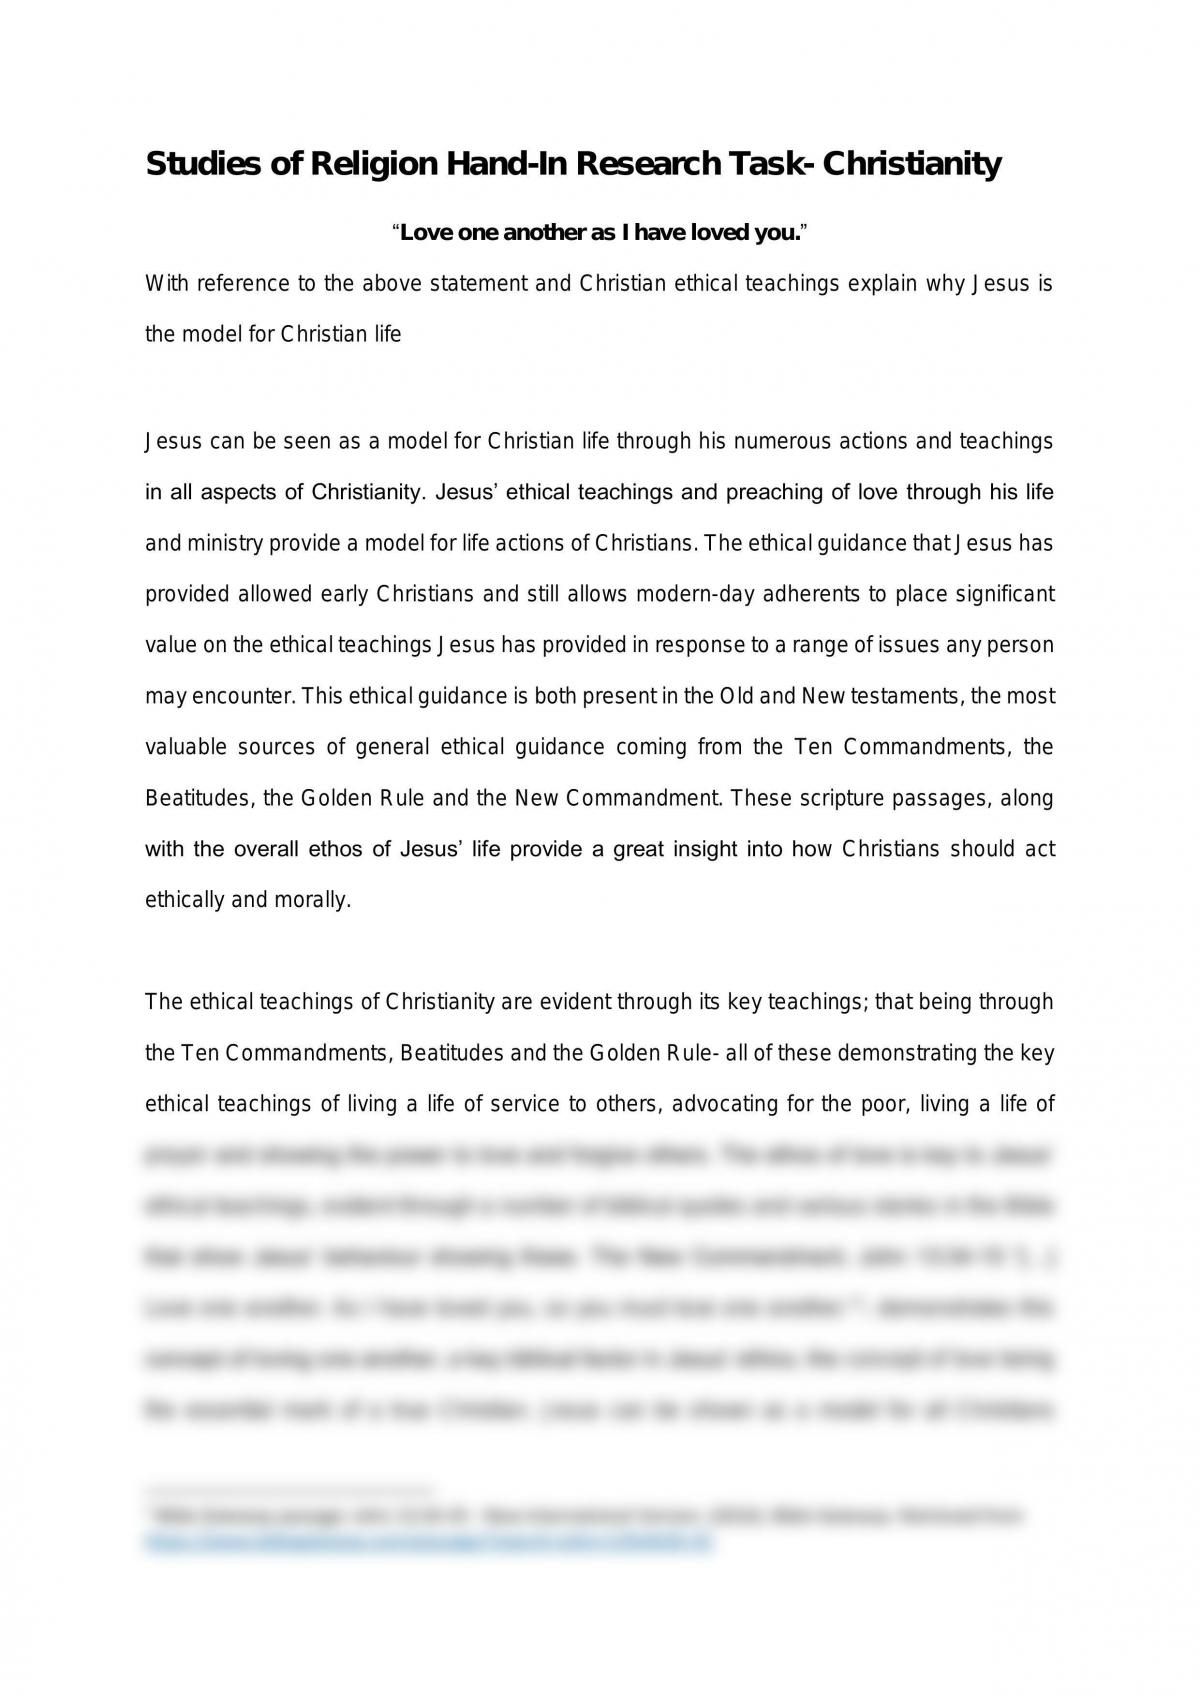 Реферат: Christianity Essay Research Paper Essay on the